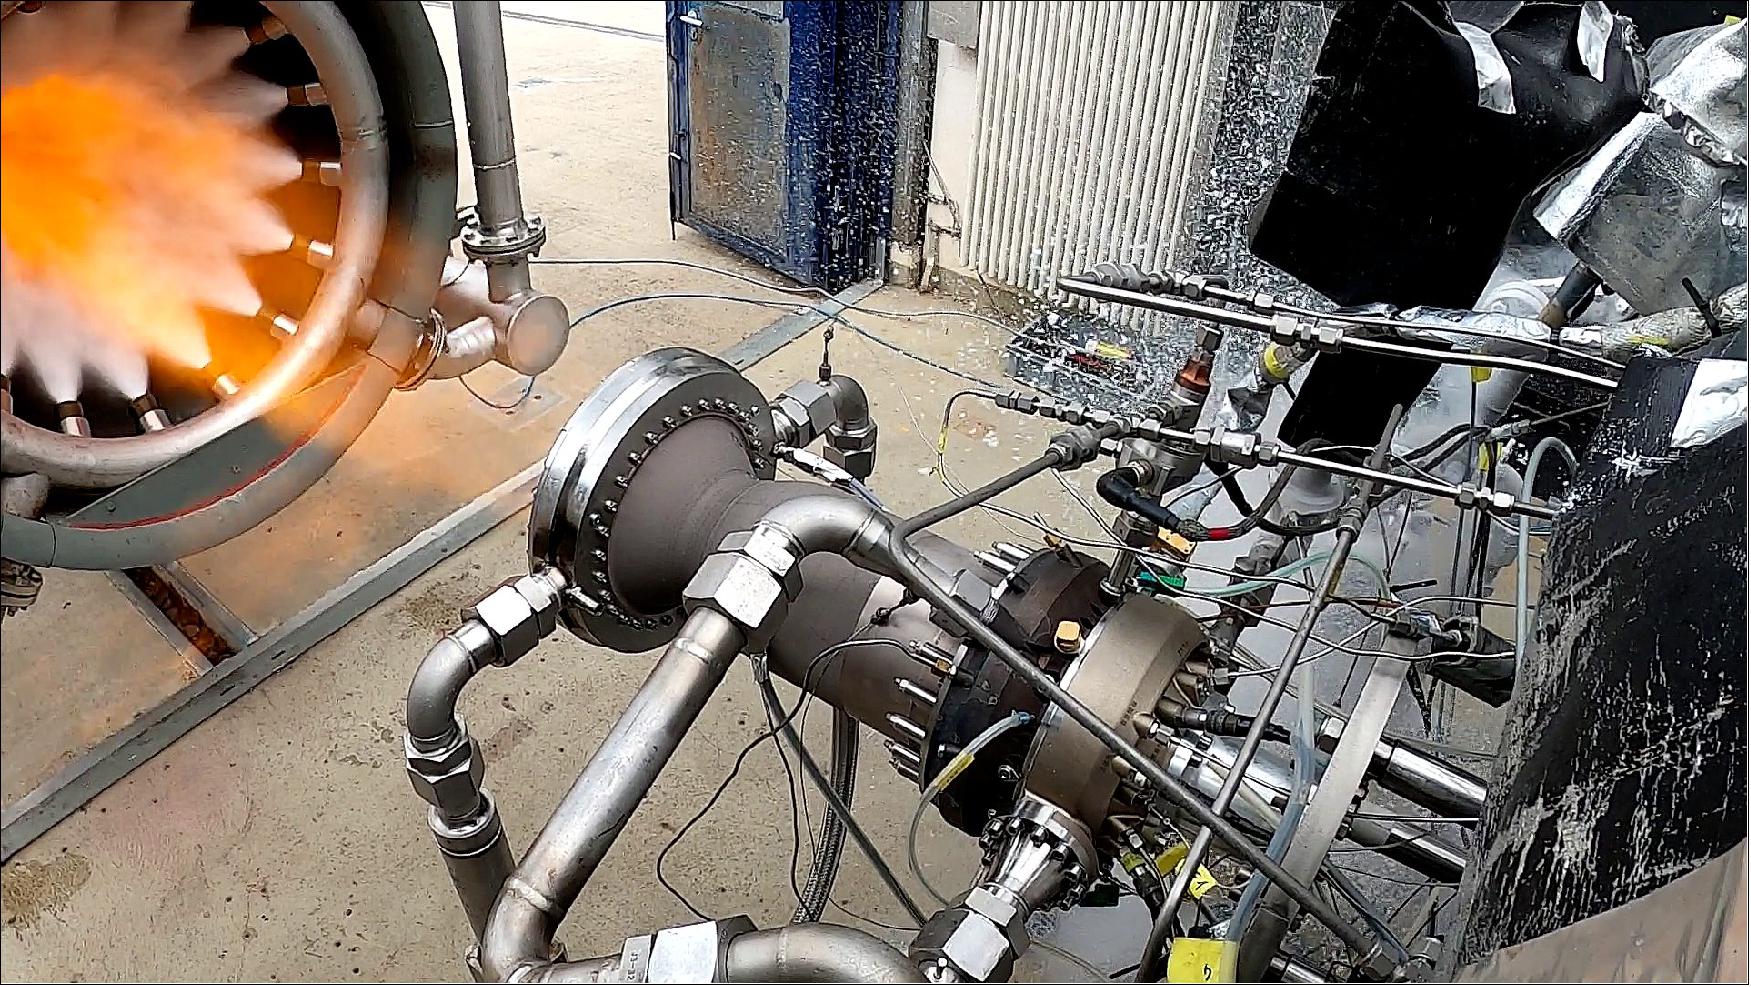 Figure 90: This first test lasted 30 seconds and was carried out on 26 May 2020 at the DLR German Aerospace Center’s Lampoldshausen testing facility. Additional tests are planned next week. The data from this test campaign will be collected and analyzed (image credit: ArianeGroup GmbH)